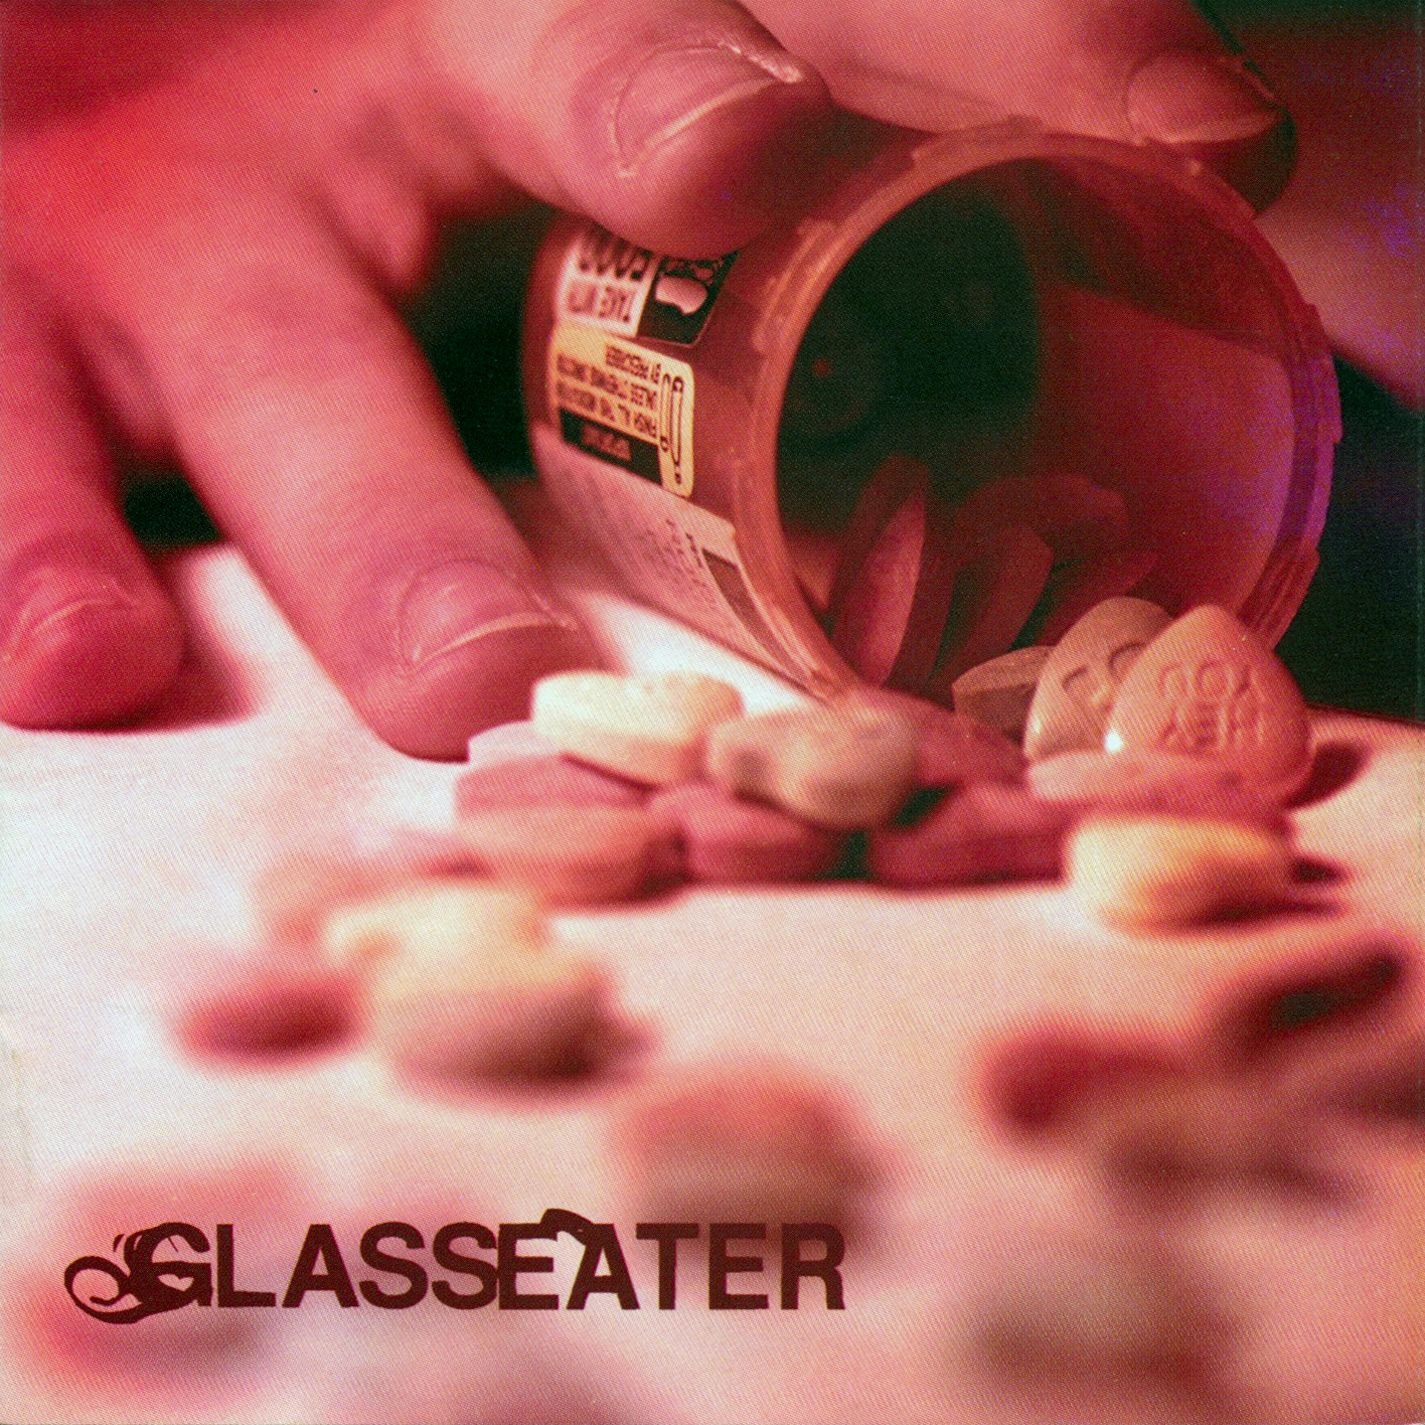 Glasseater-Glasseater-16BIT-WEB-FLAC-2002-VEXED